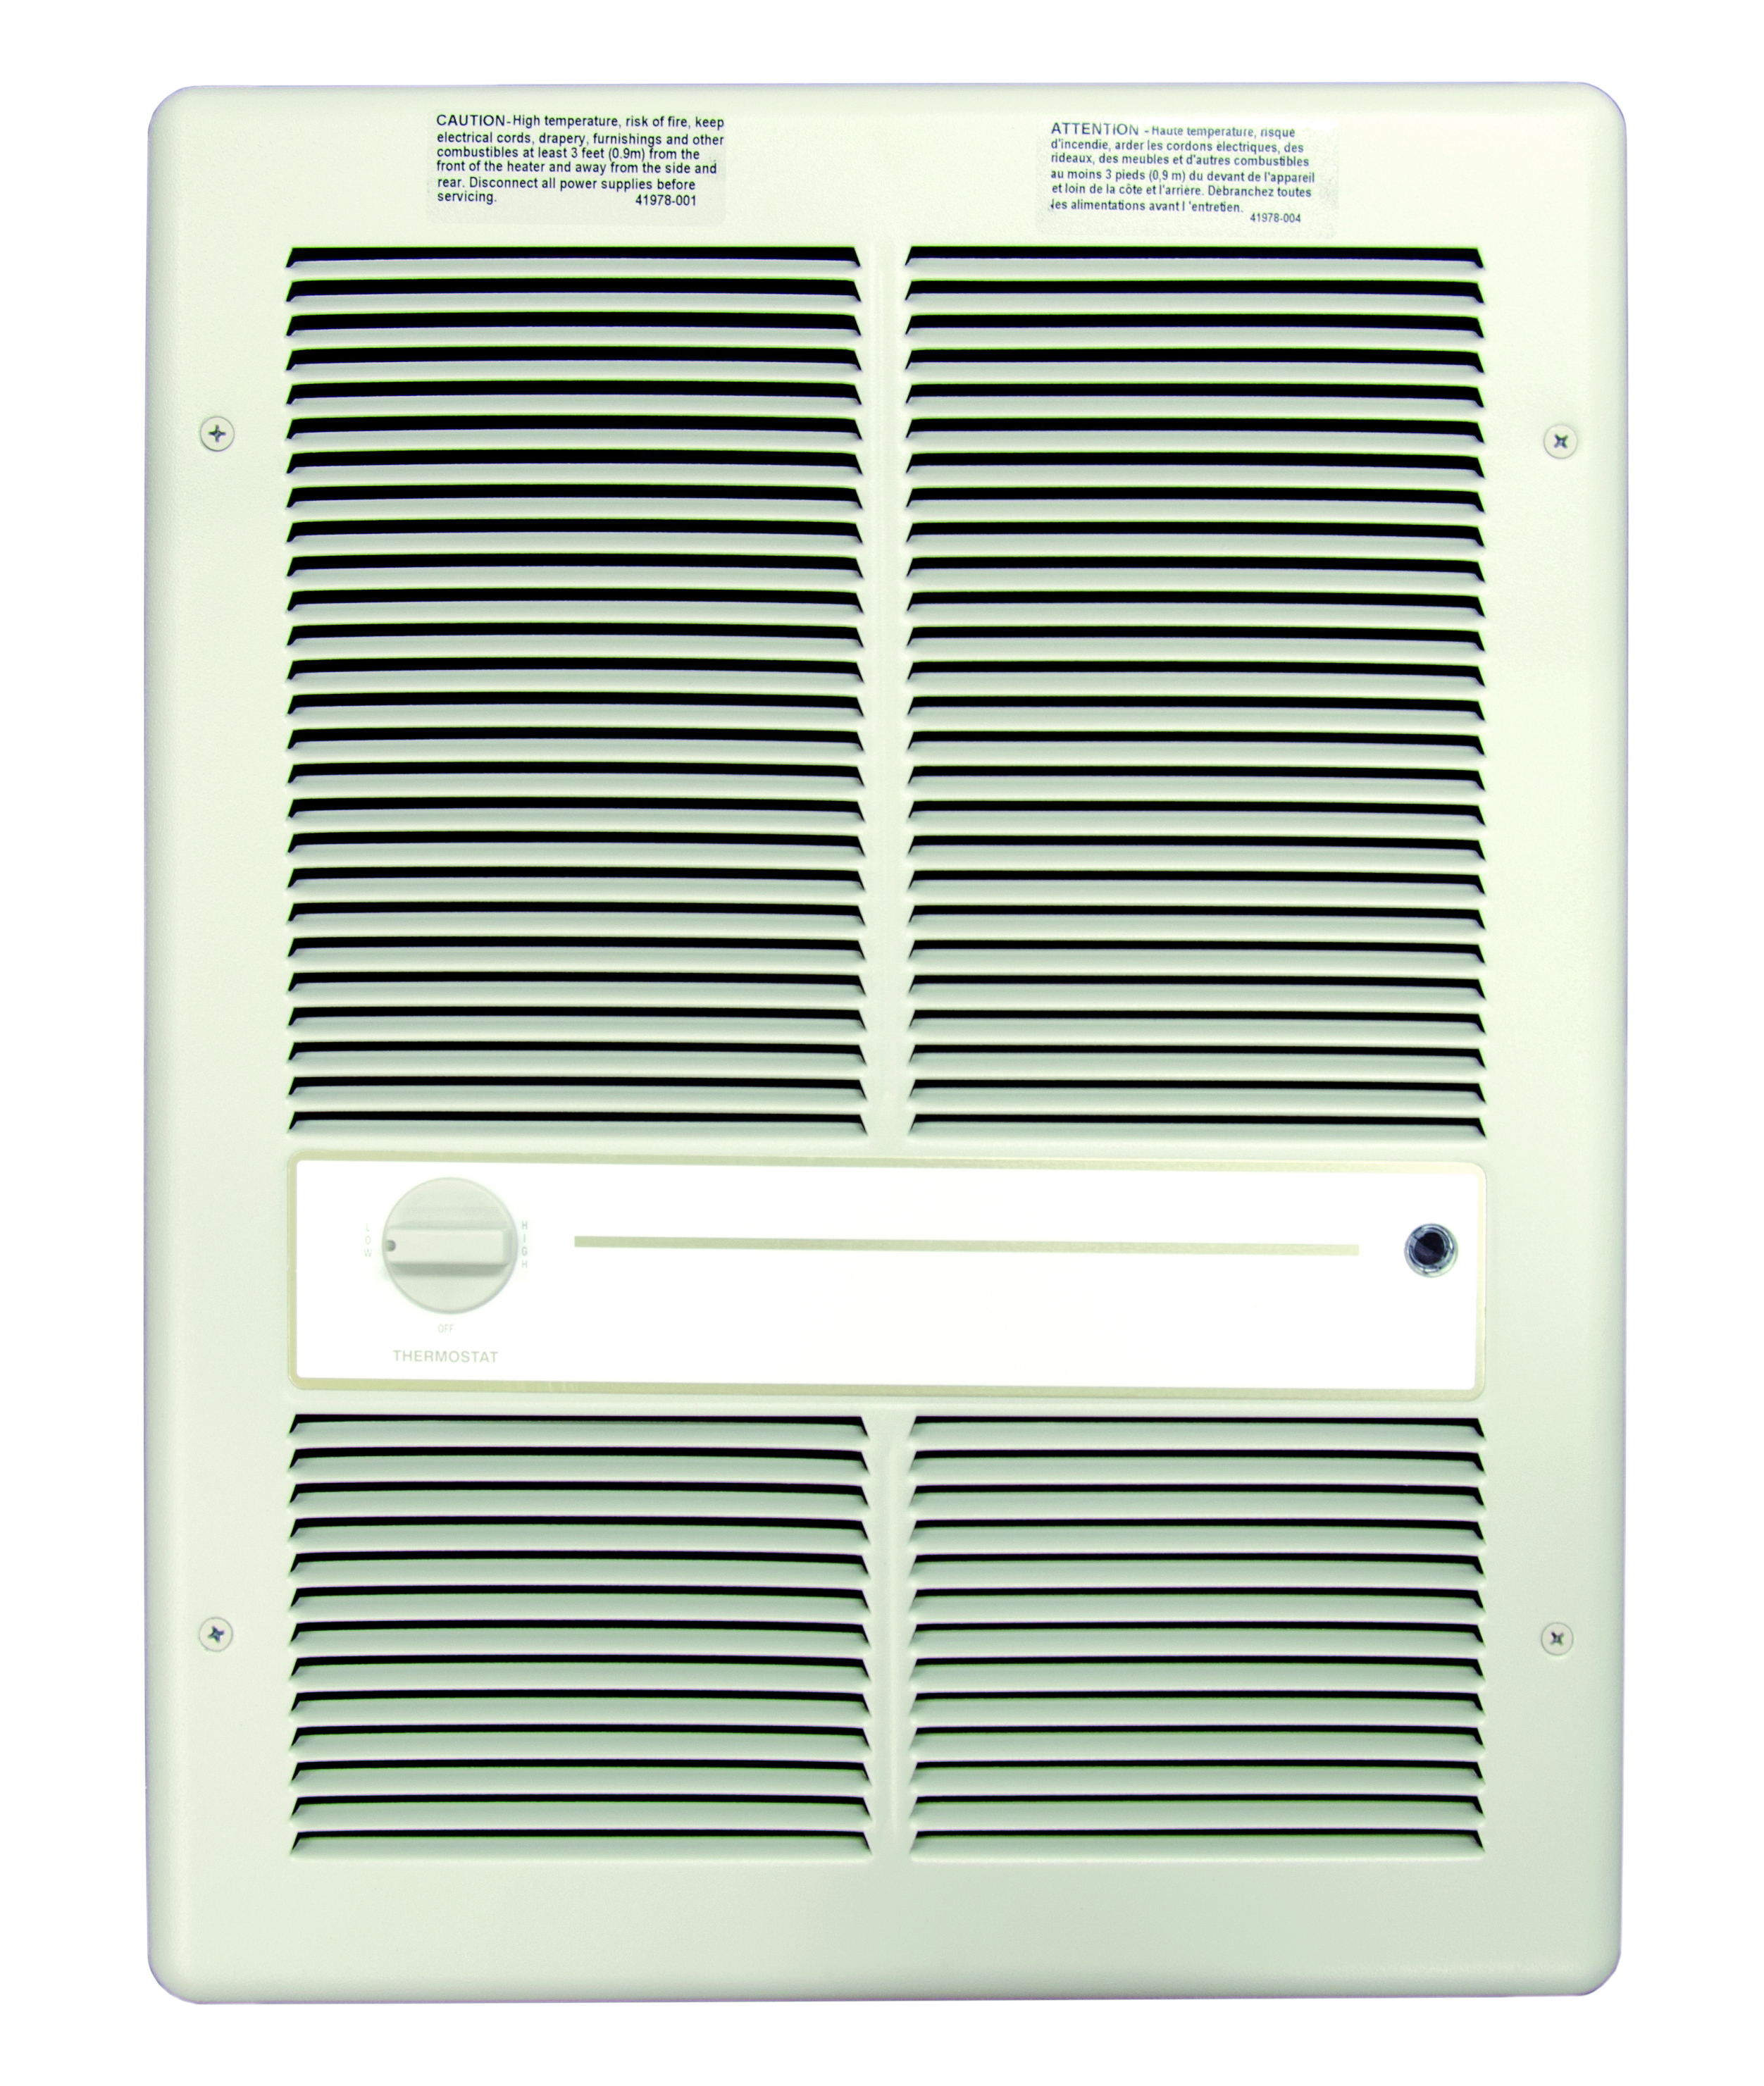 Fan Forced Wall Heater, Maximum Operating Temperature- 90 (Thermostat) DEG F 1 PH, 4000/3000, 2000/1500 WTT, 240/208 V, Wall Mounting, Steel Housing Material, Dimensions- 14-3/16 Width X 19-15/16 Height X 4 Depth IN, BTU Rating- 13648, No Thermostat, White